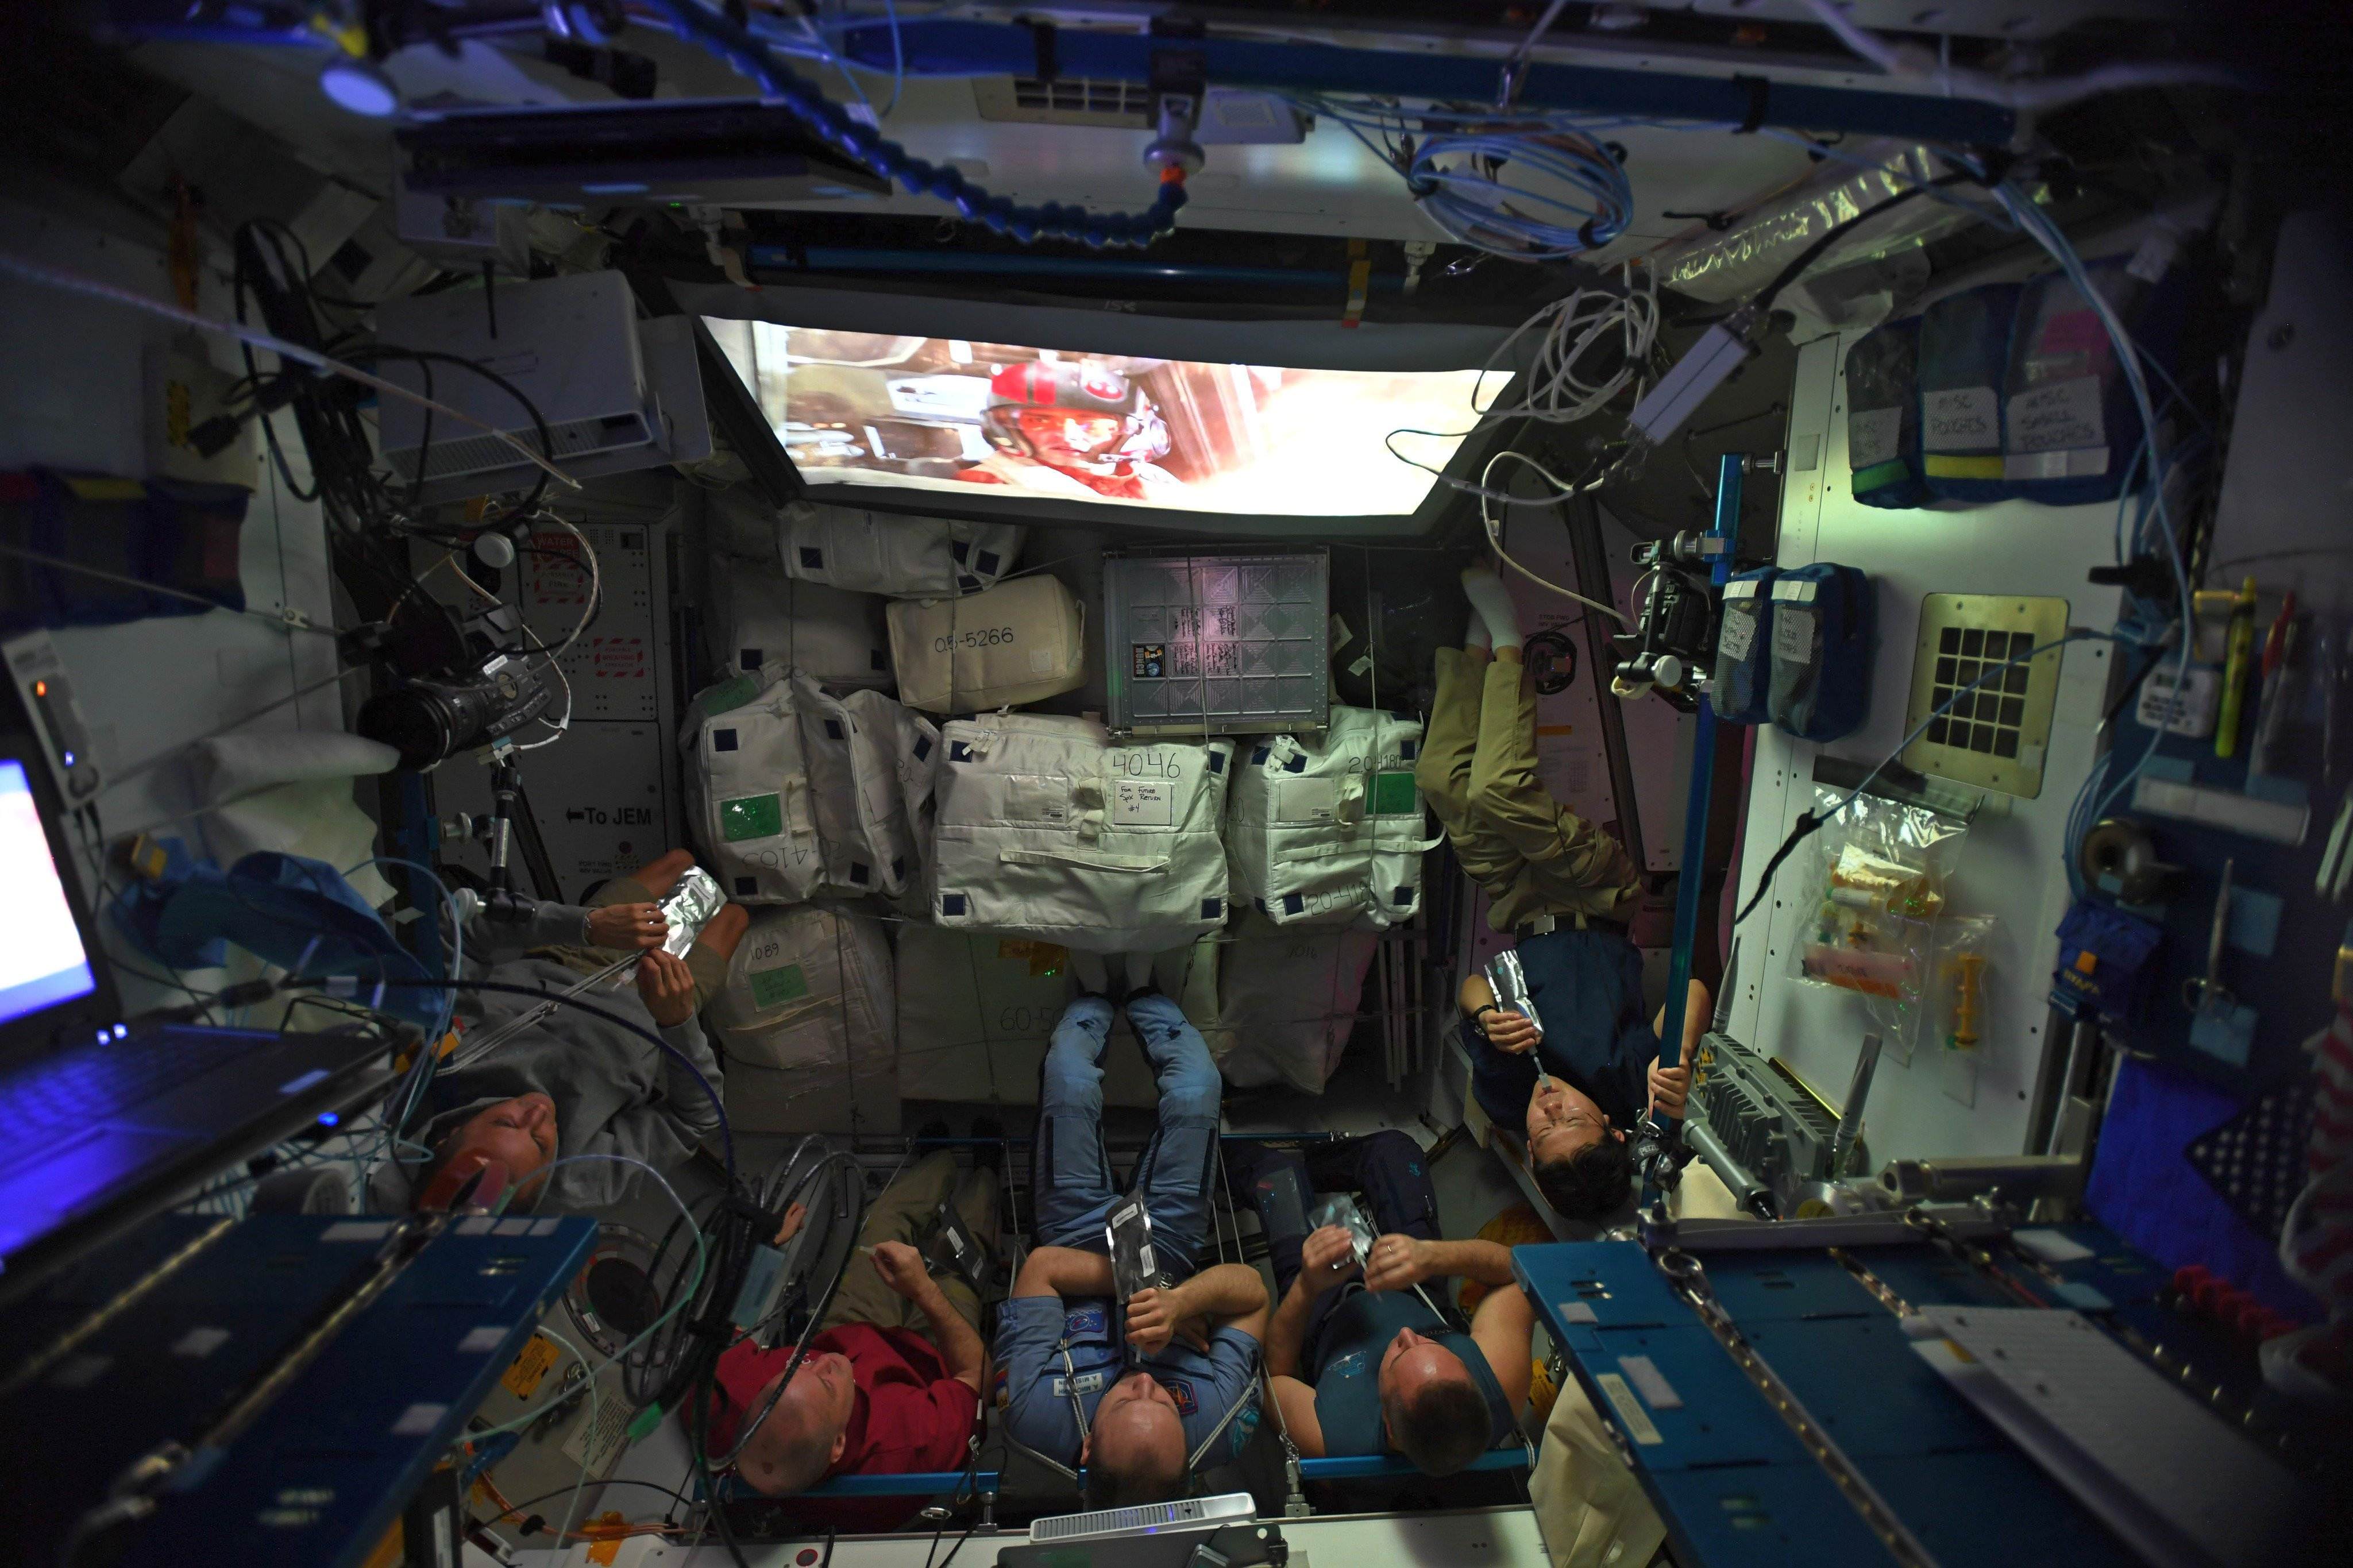 Astronauts watching Star Wars on the ISS / Boing Boing